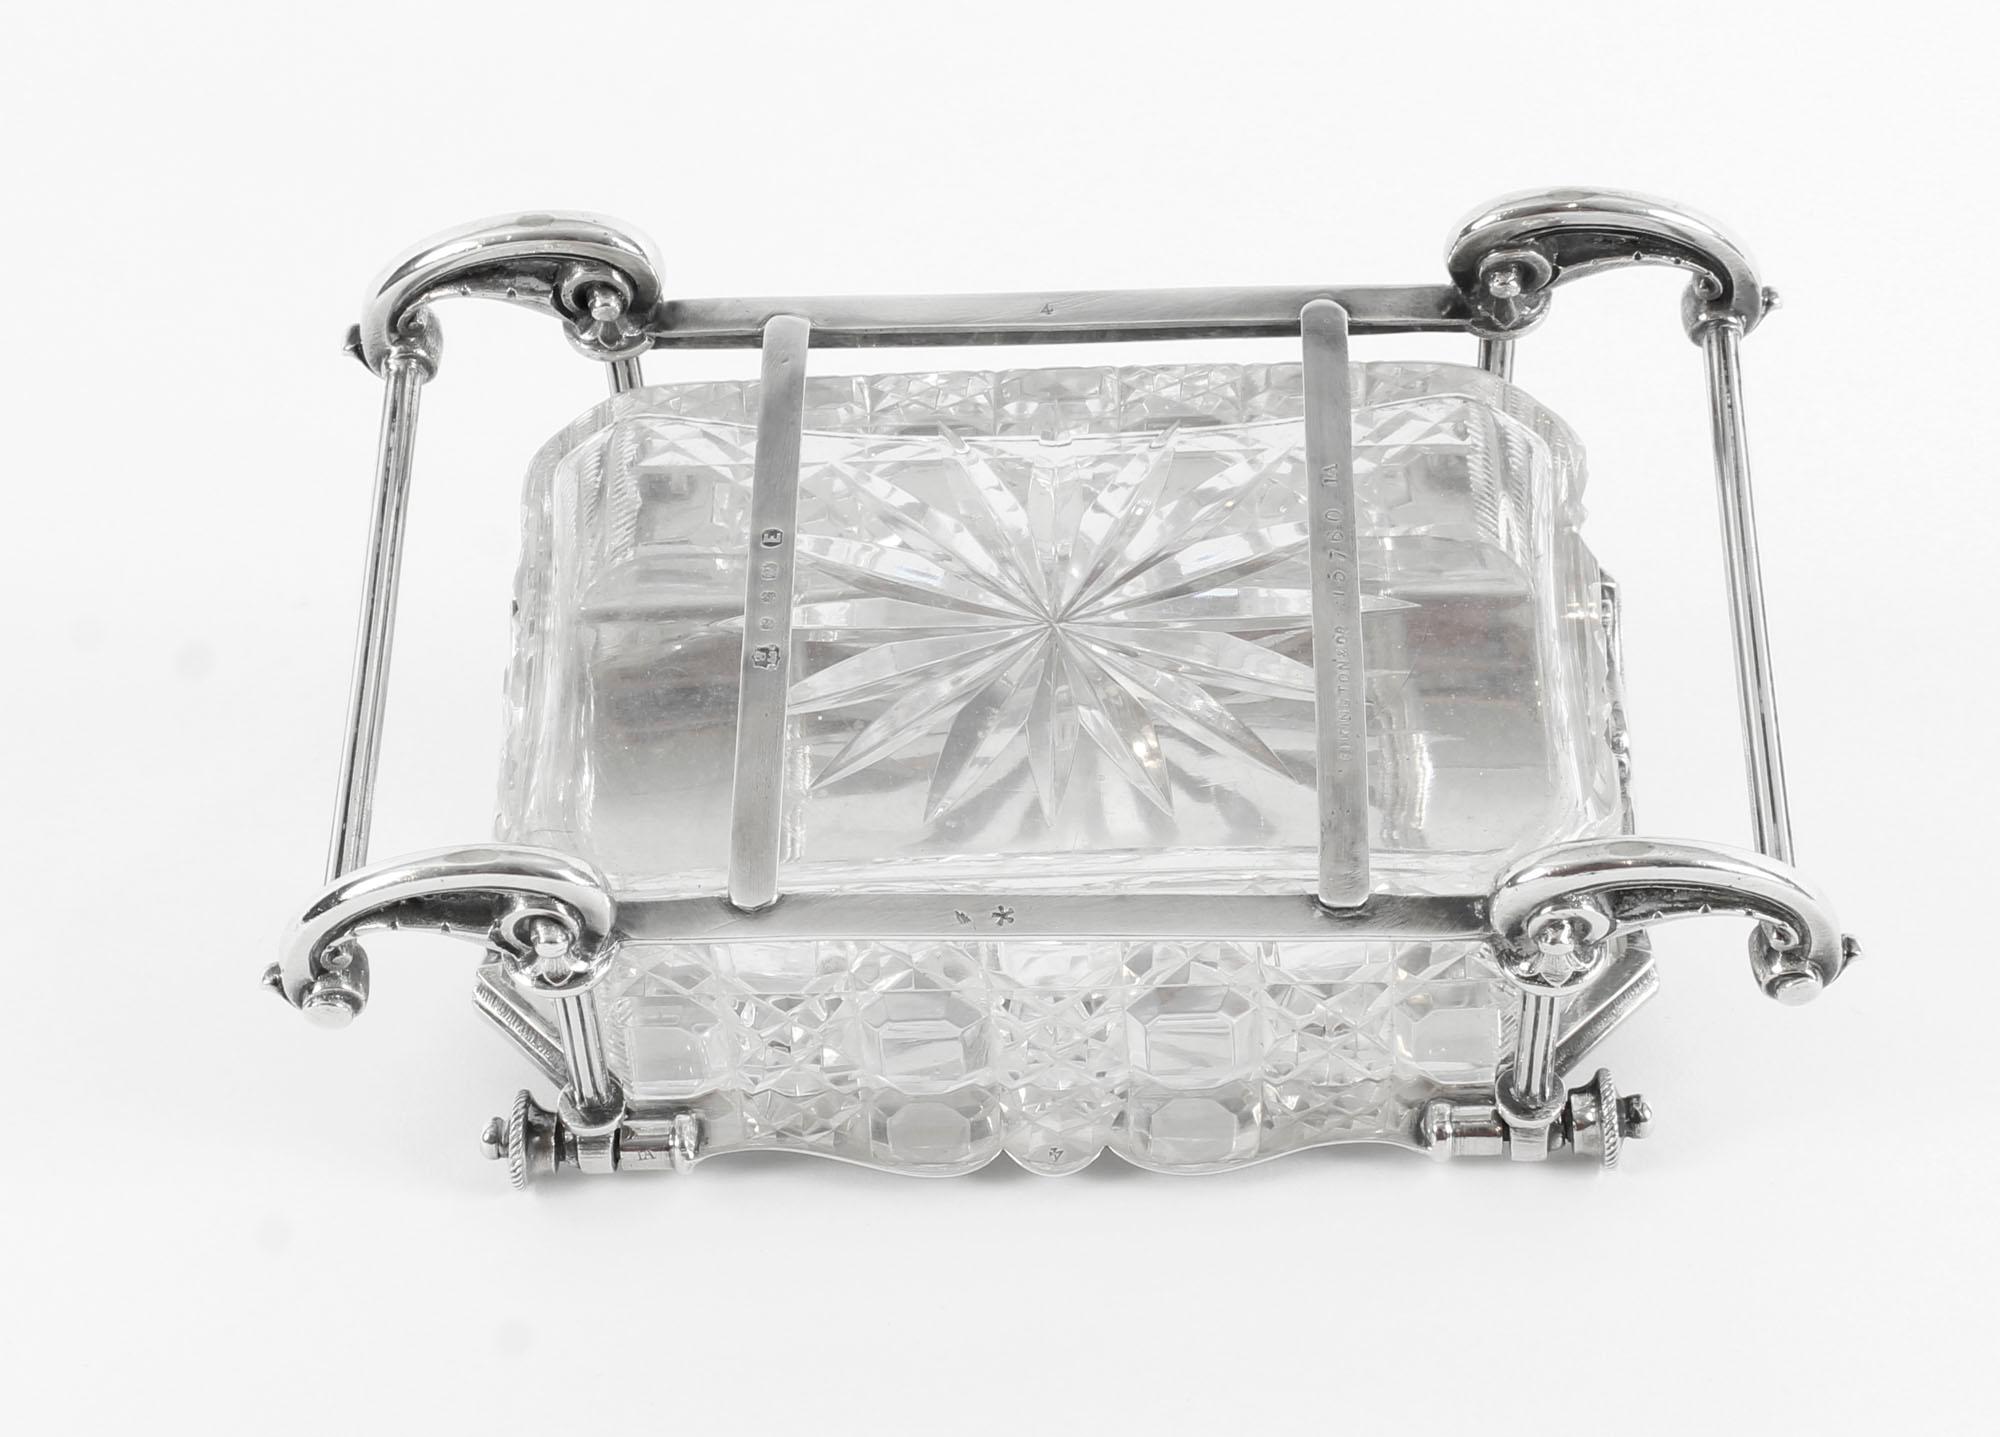 Elkington & Co English Silver Plated and Cut Glass Butter Dish, 19th Century 9